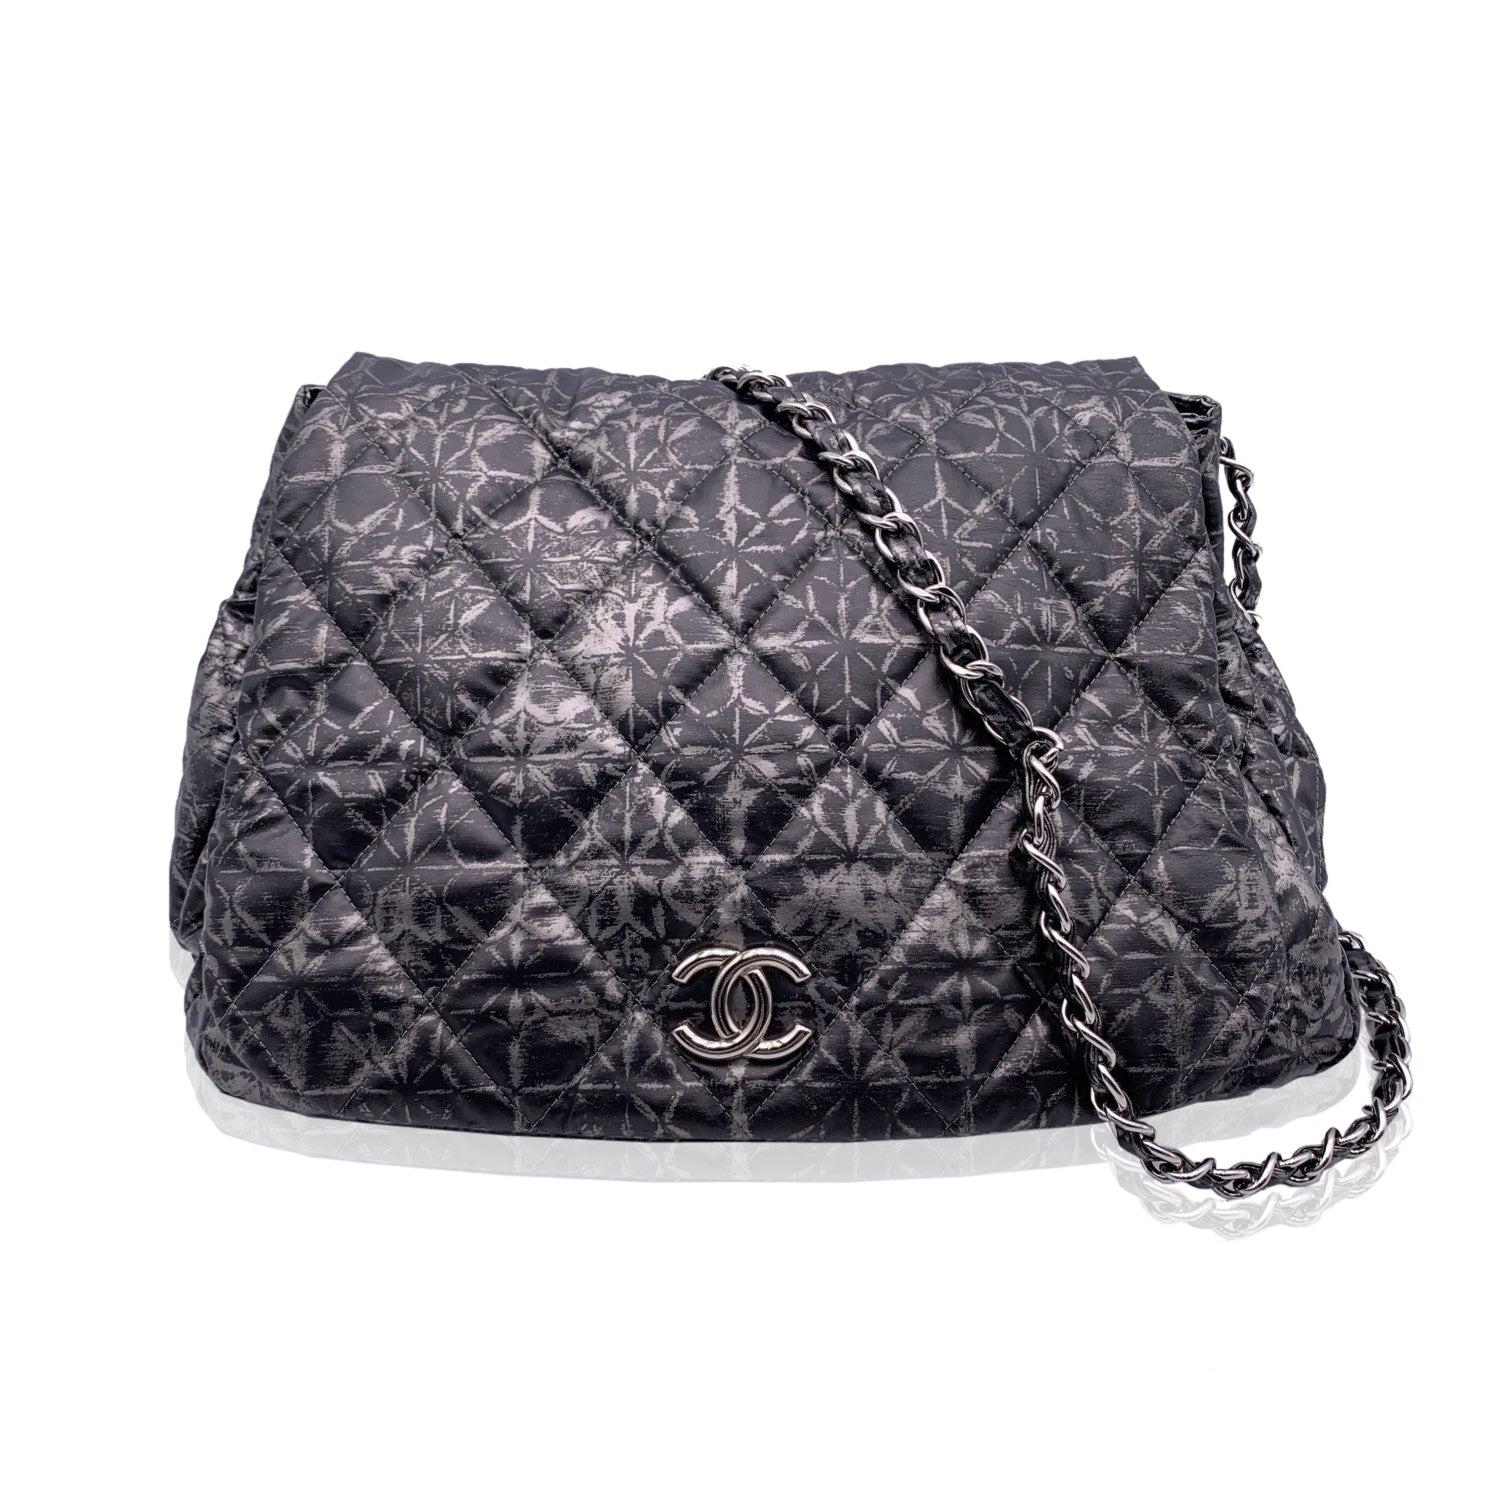 chanel rock in moscow bag